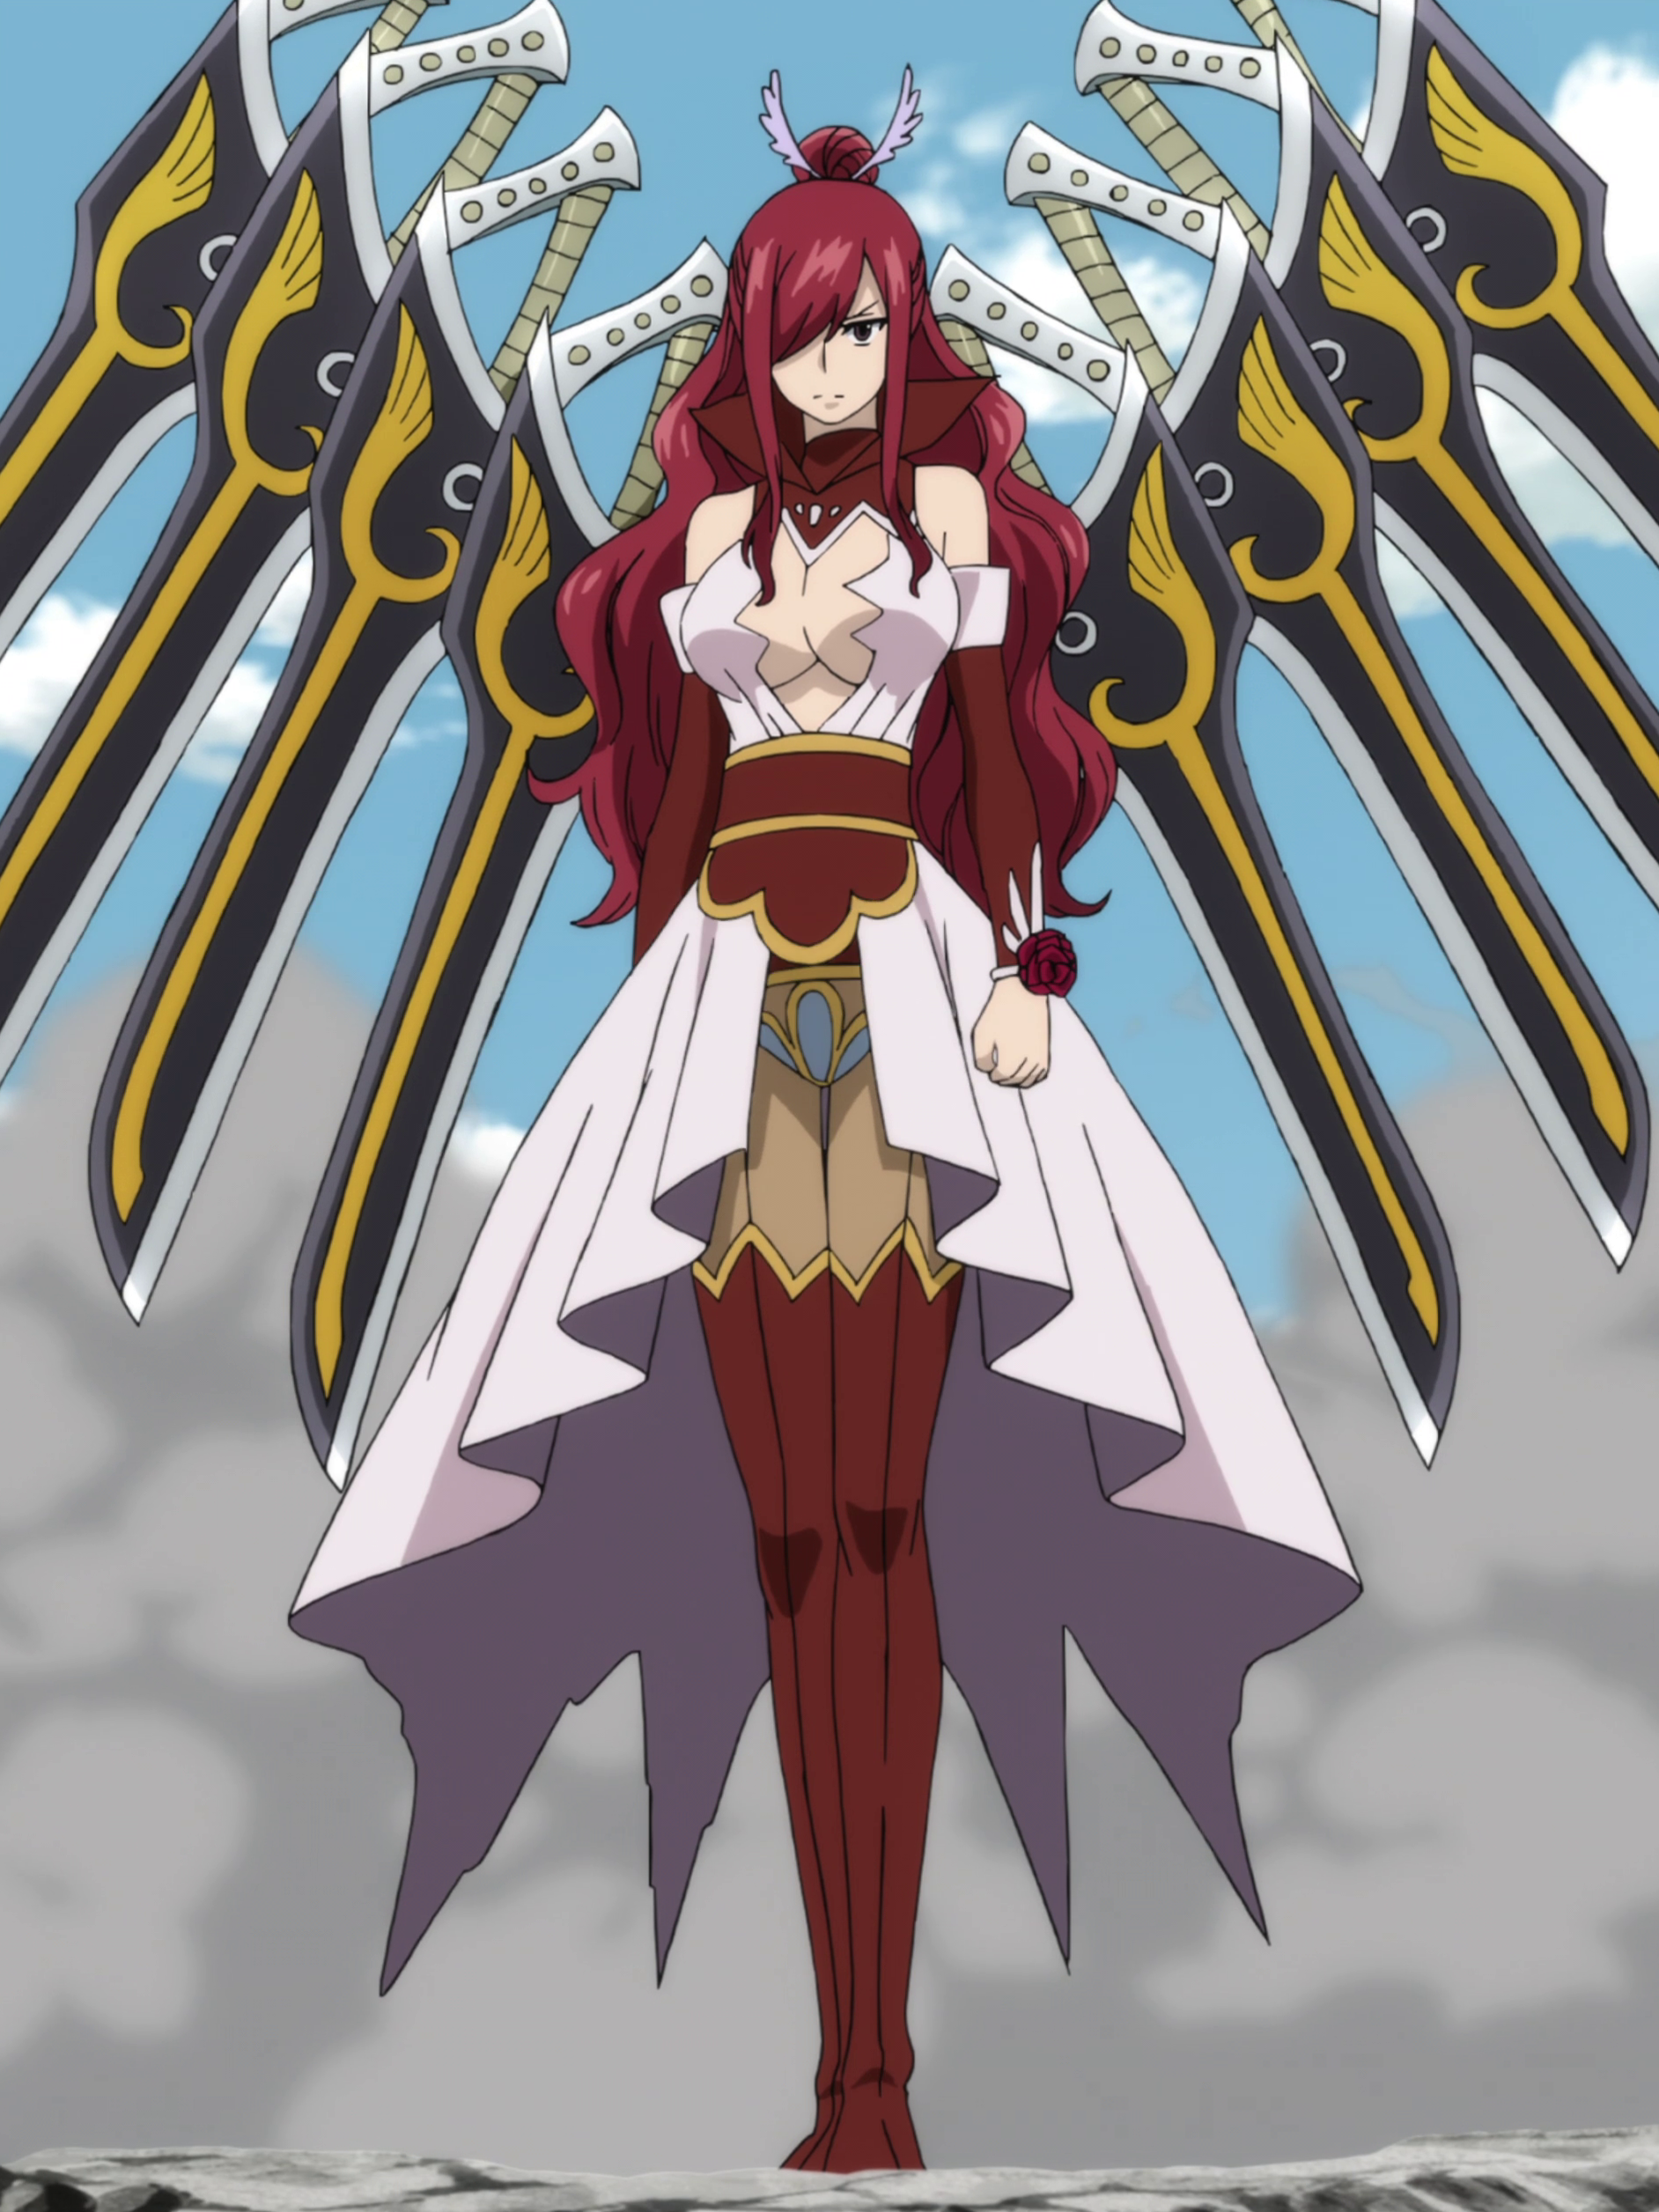 Ataraxia Armor is an armor of Erza Scarlet's. This armor takes for...